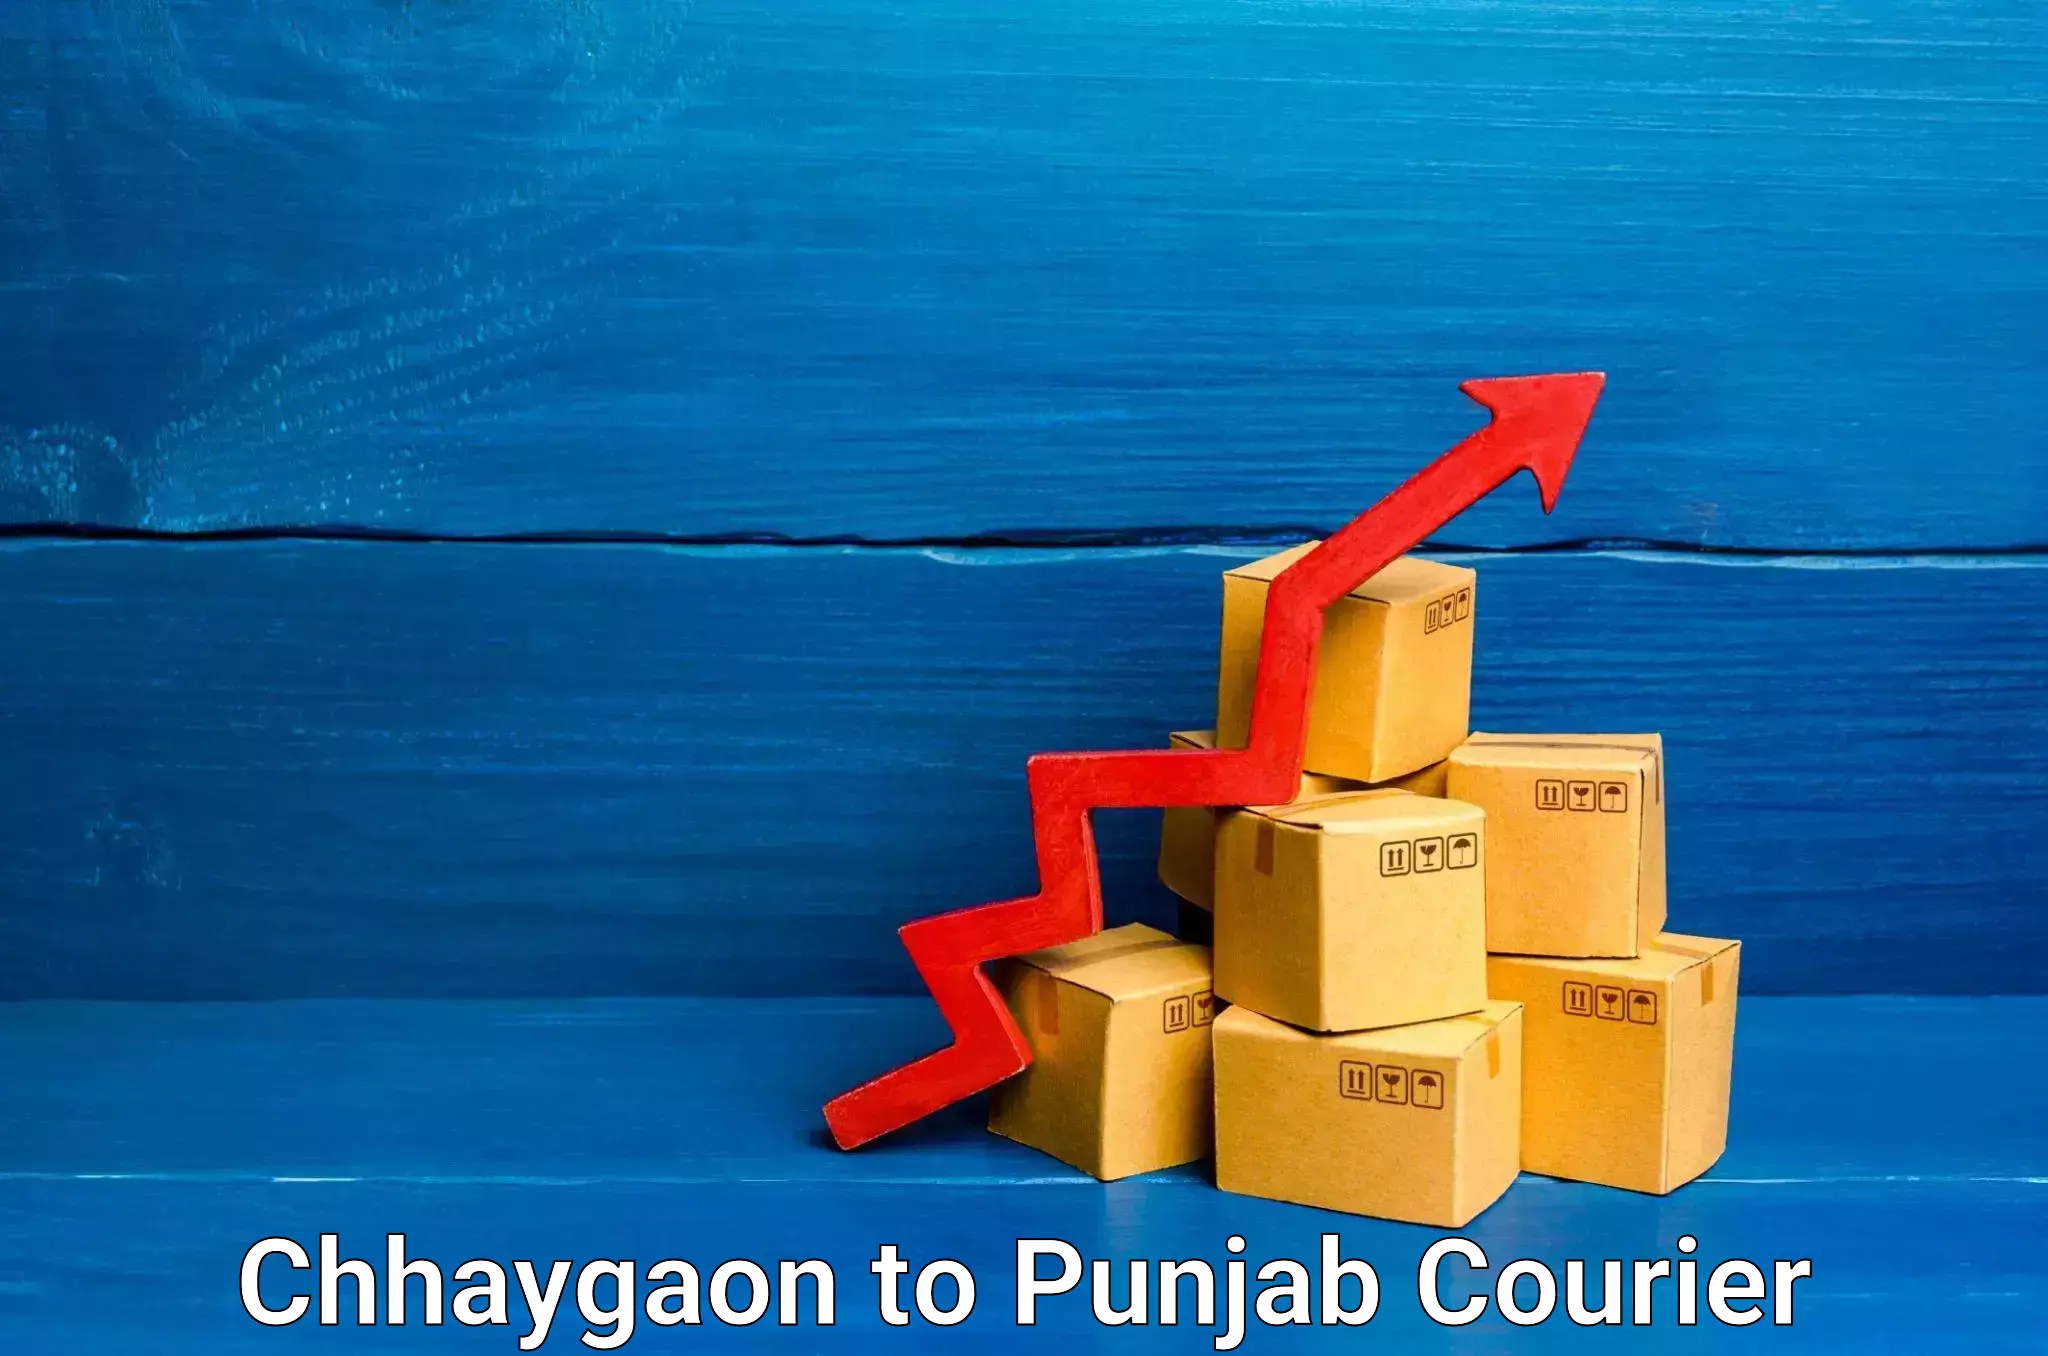 High-speed parcel service Chhaygaon to Faridkot